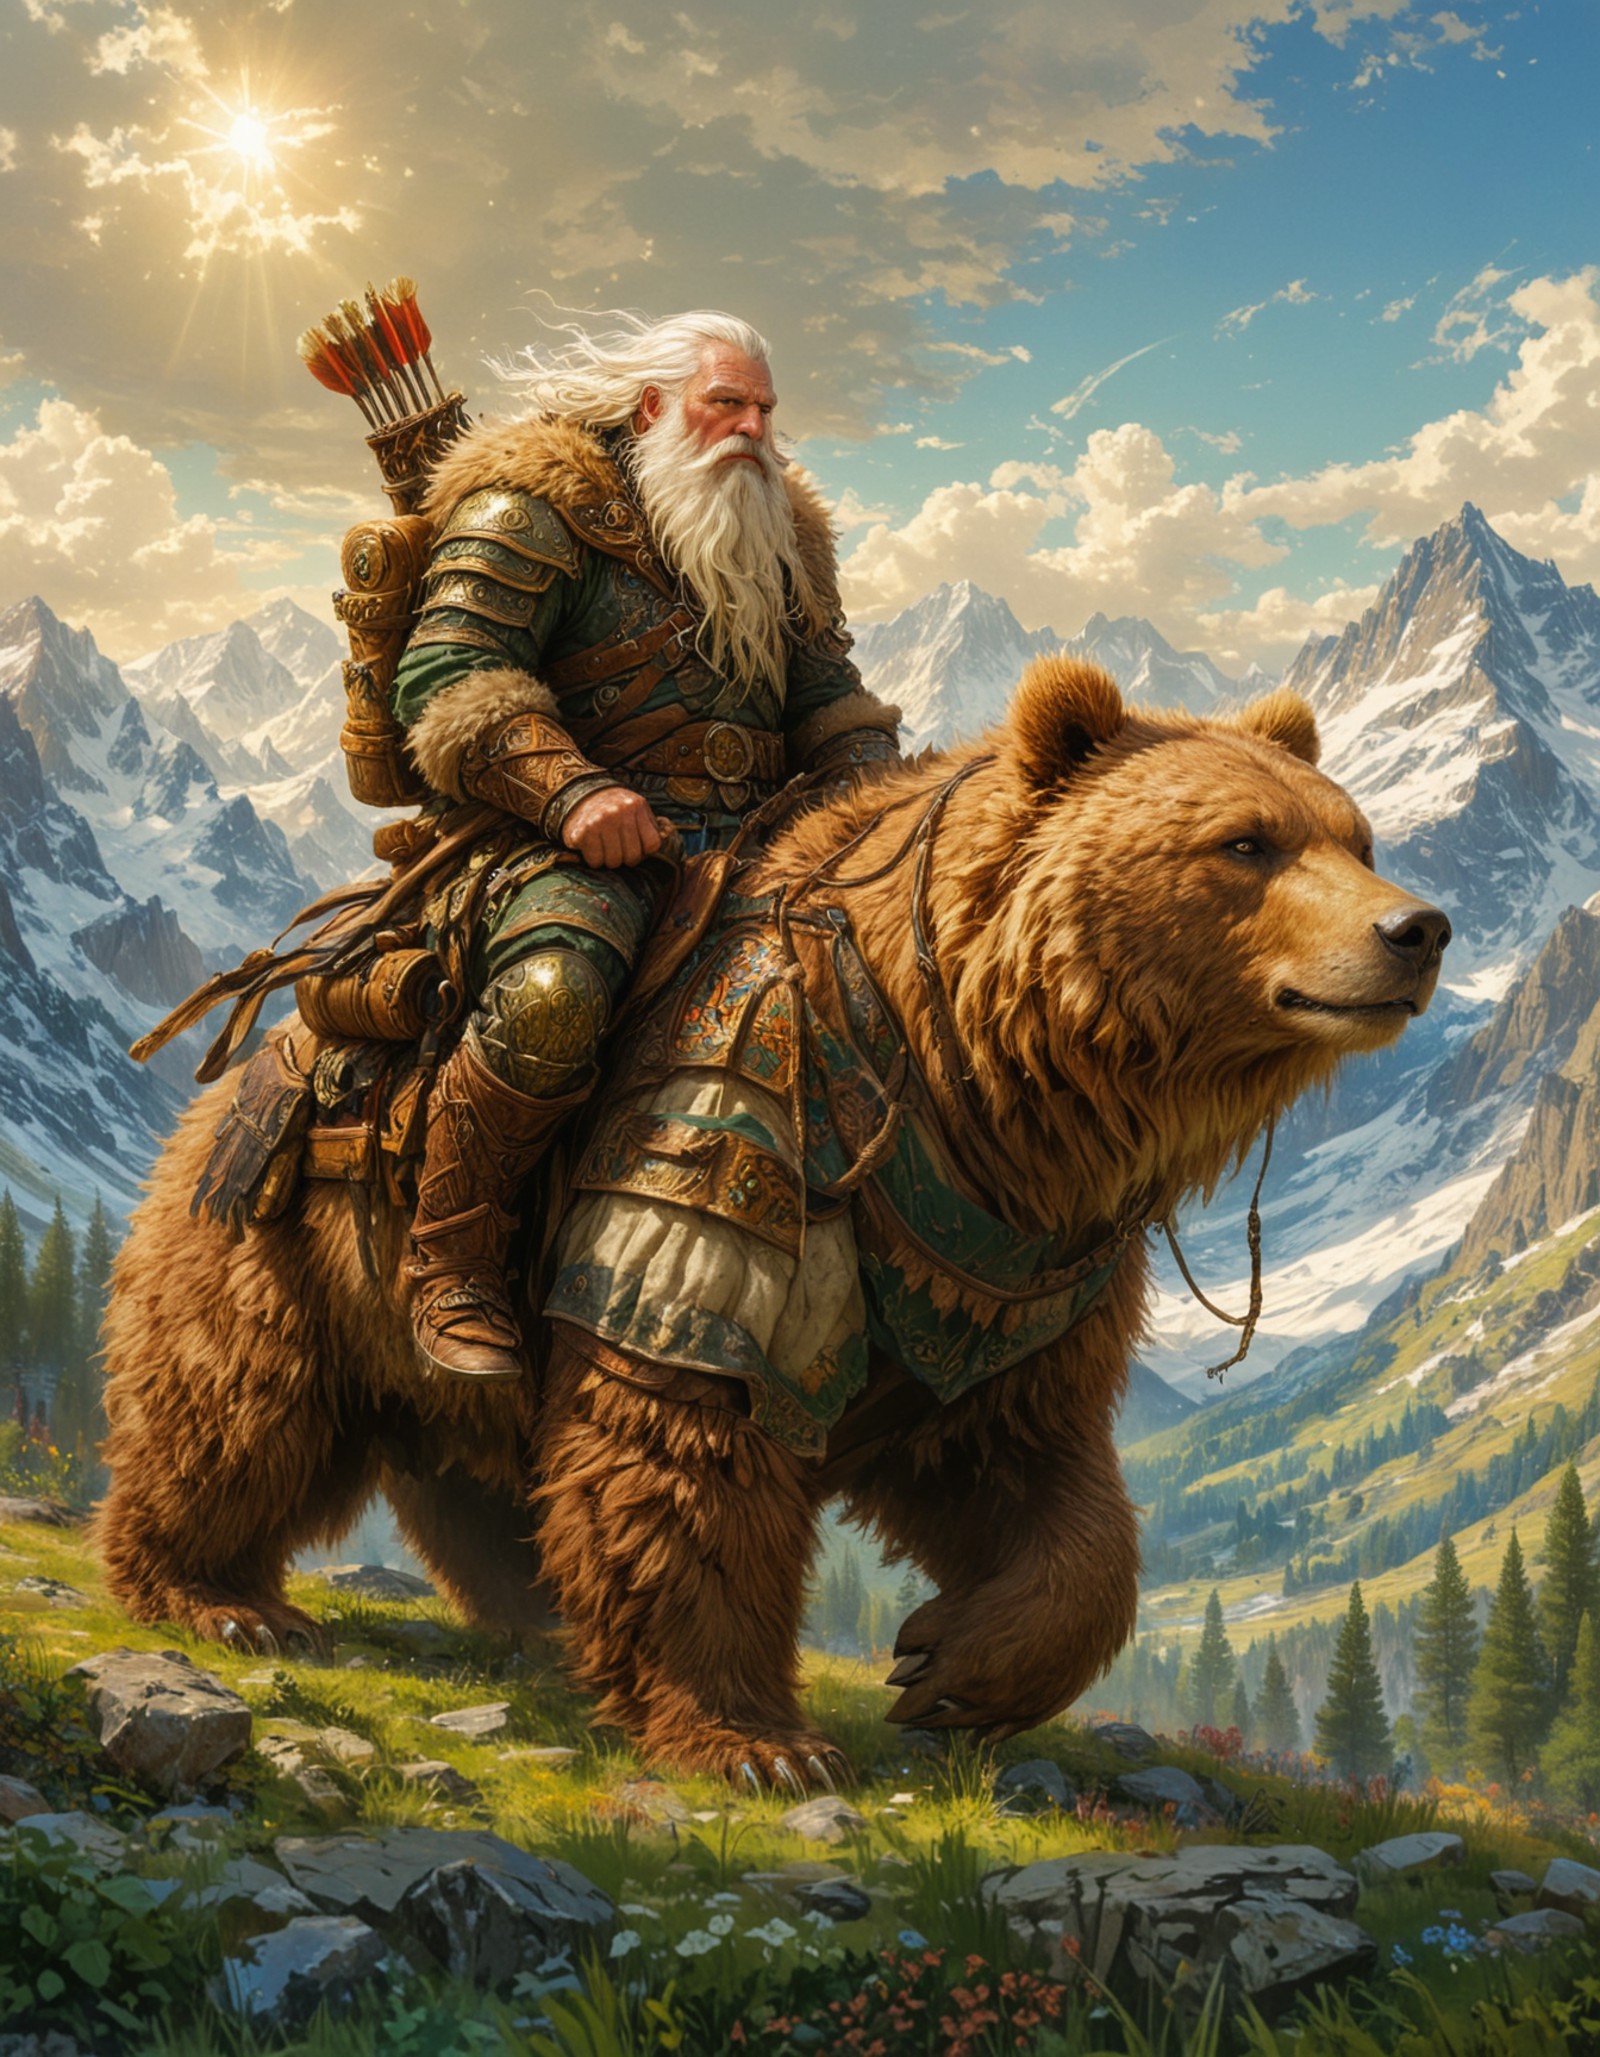 A heavily armored man riding atop a large brown bear in a serene mountainous landscape. The sun peeks through the clouds, casting a warm glow over the peaks and illuminating the lush greenery below. The rider carries an assortment of weapons and appears poised for travel or adventure. 